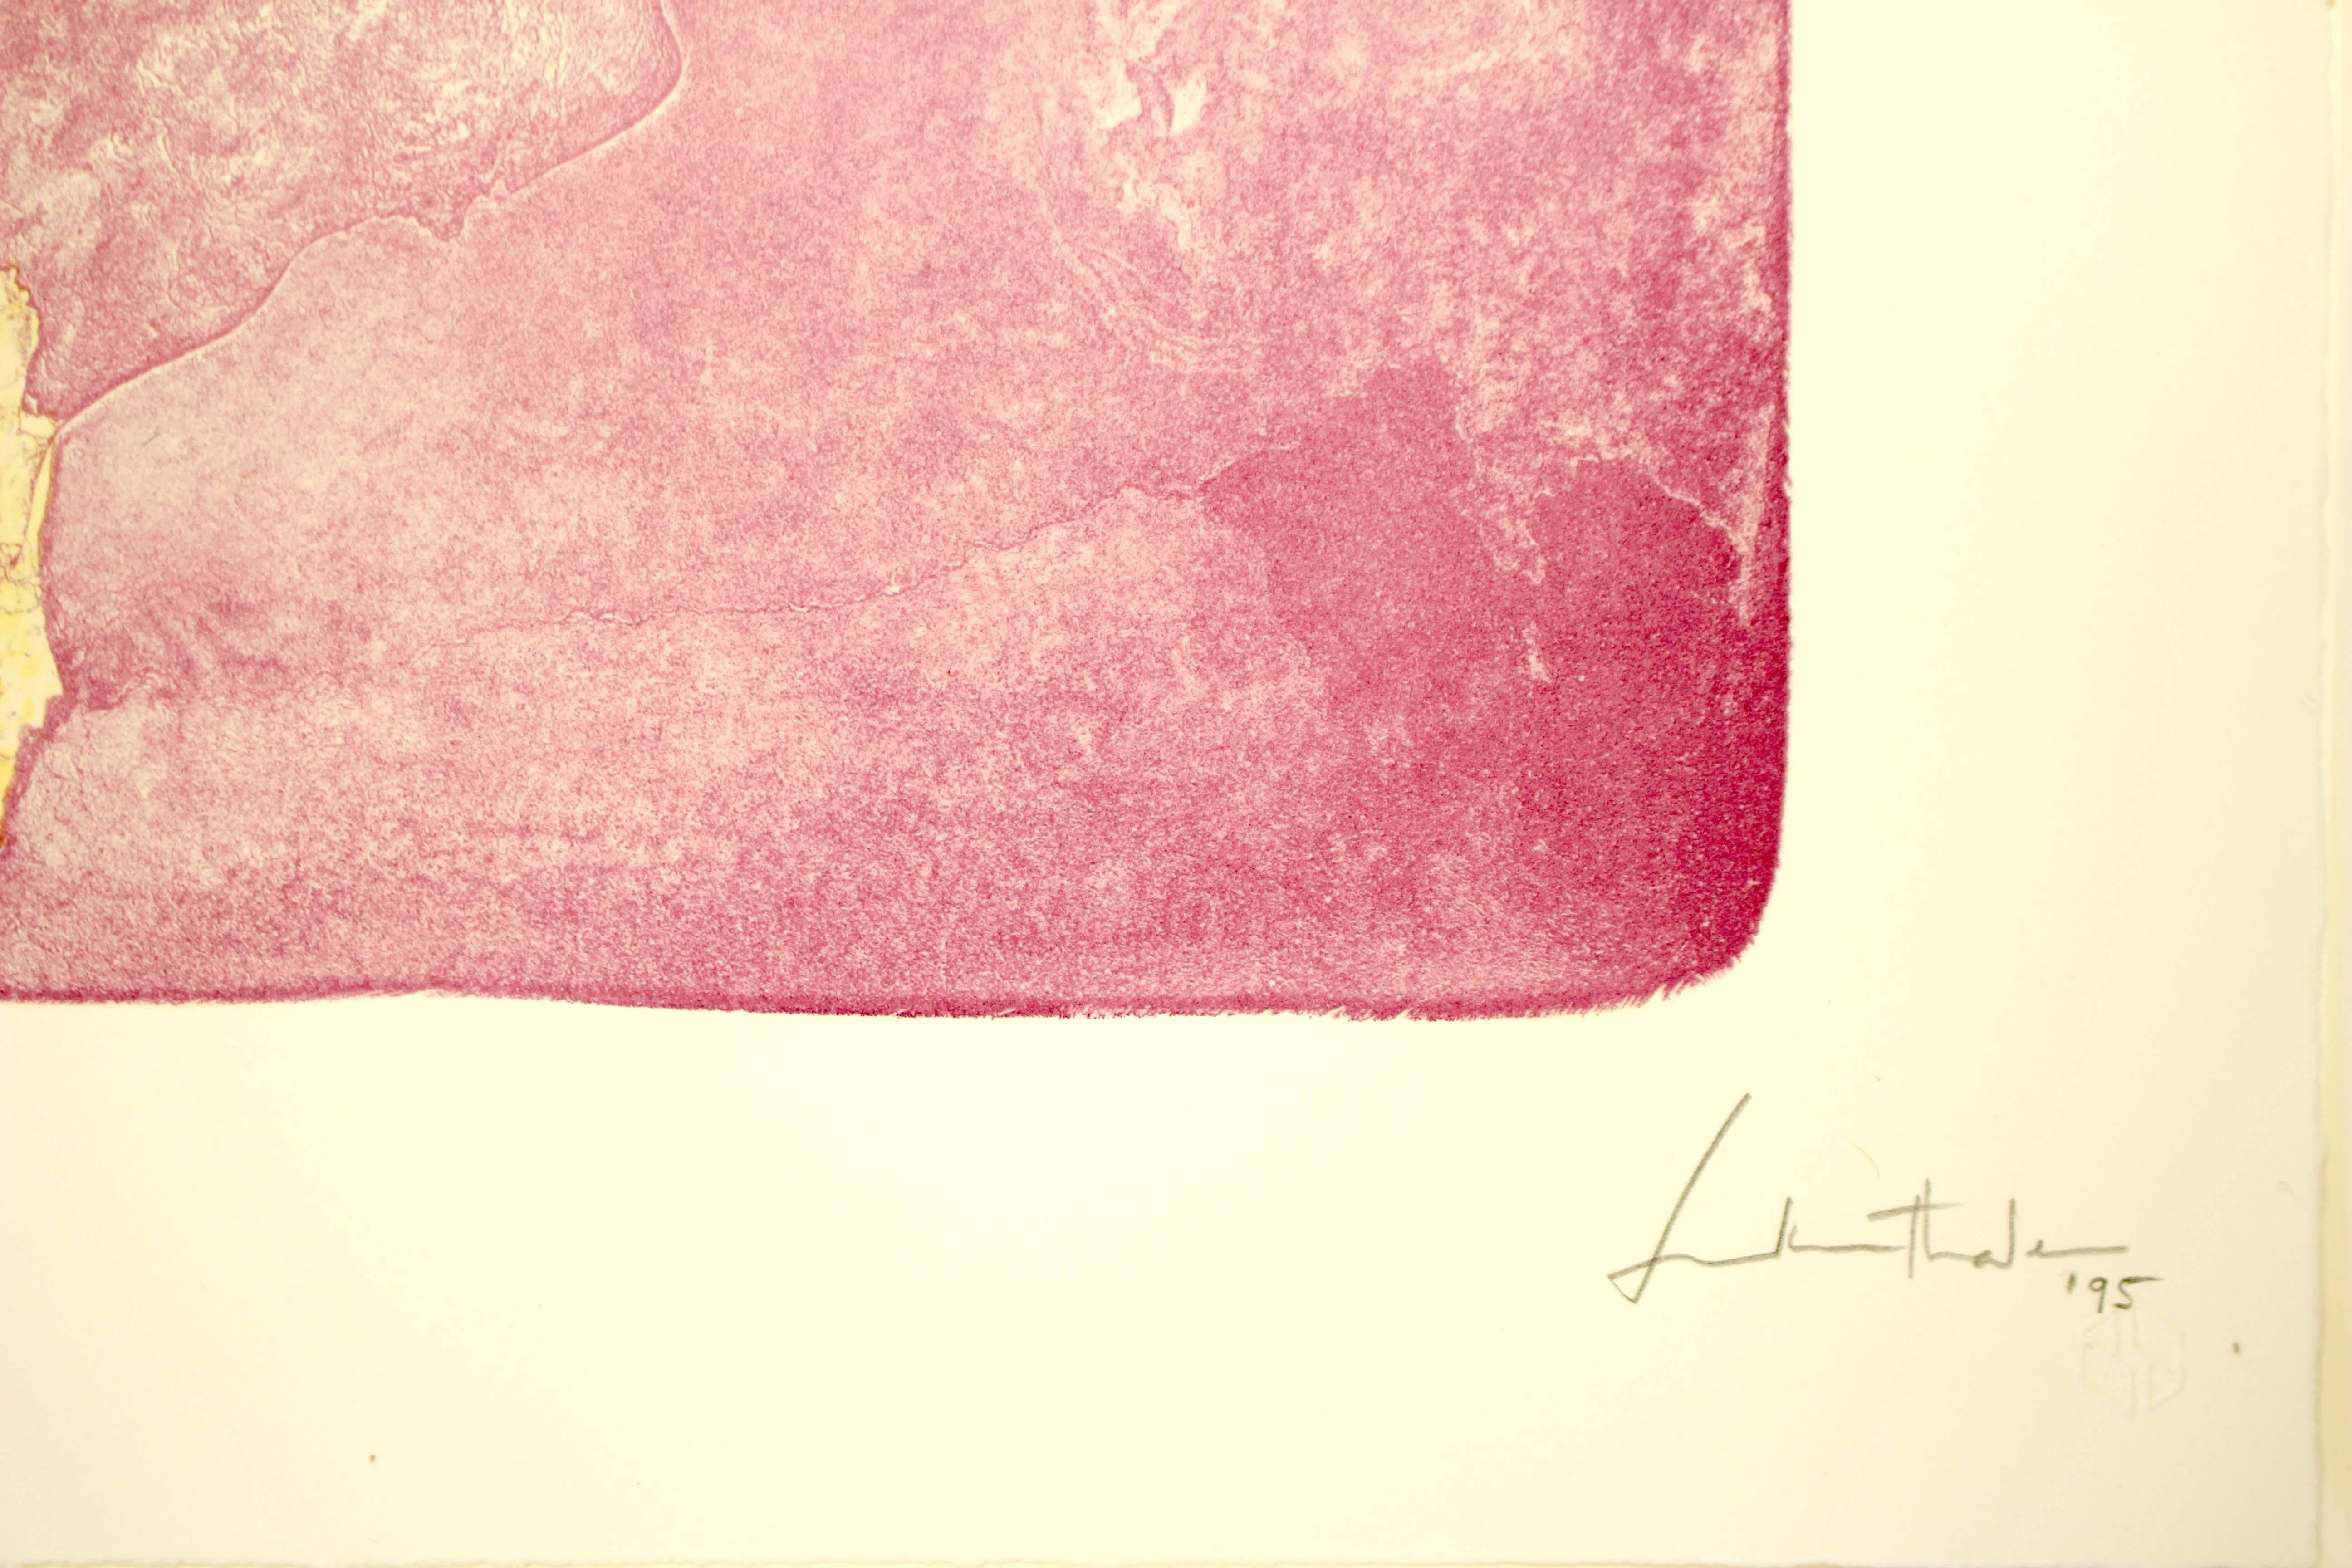 Helen Frankenthaler
Reflections X, 1995, (7/30)
lithograph
14.75 x 11.75 in

A second-generation Abstract Expressionist painter, Helen Frankenthaler became active in the New York School of the 1950s, initially influenced by artists like Arshile